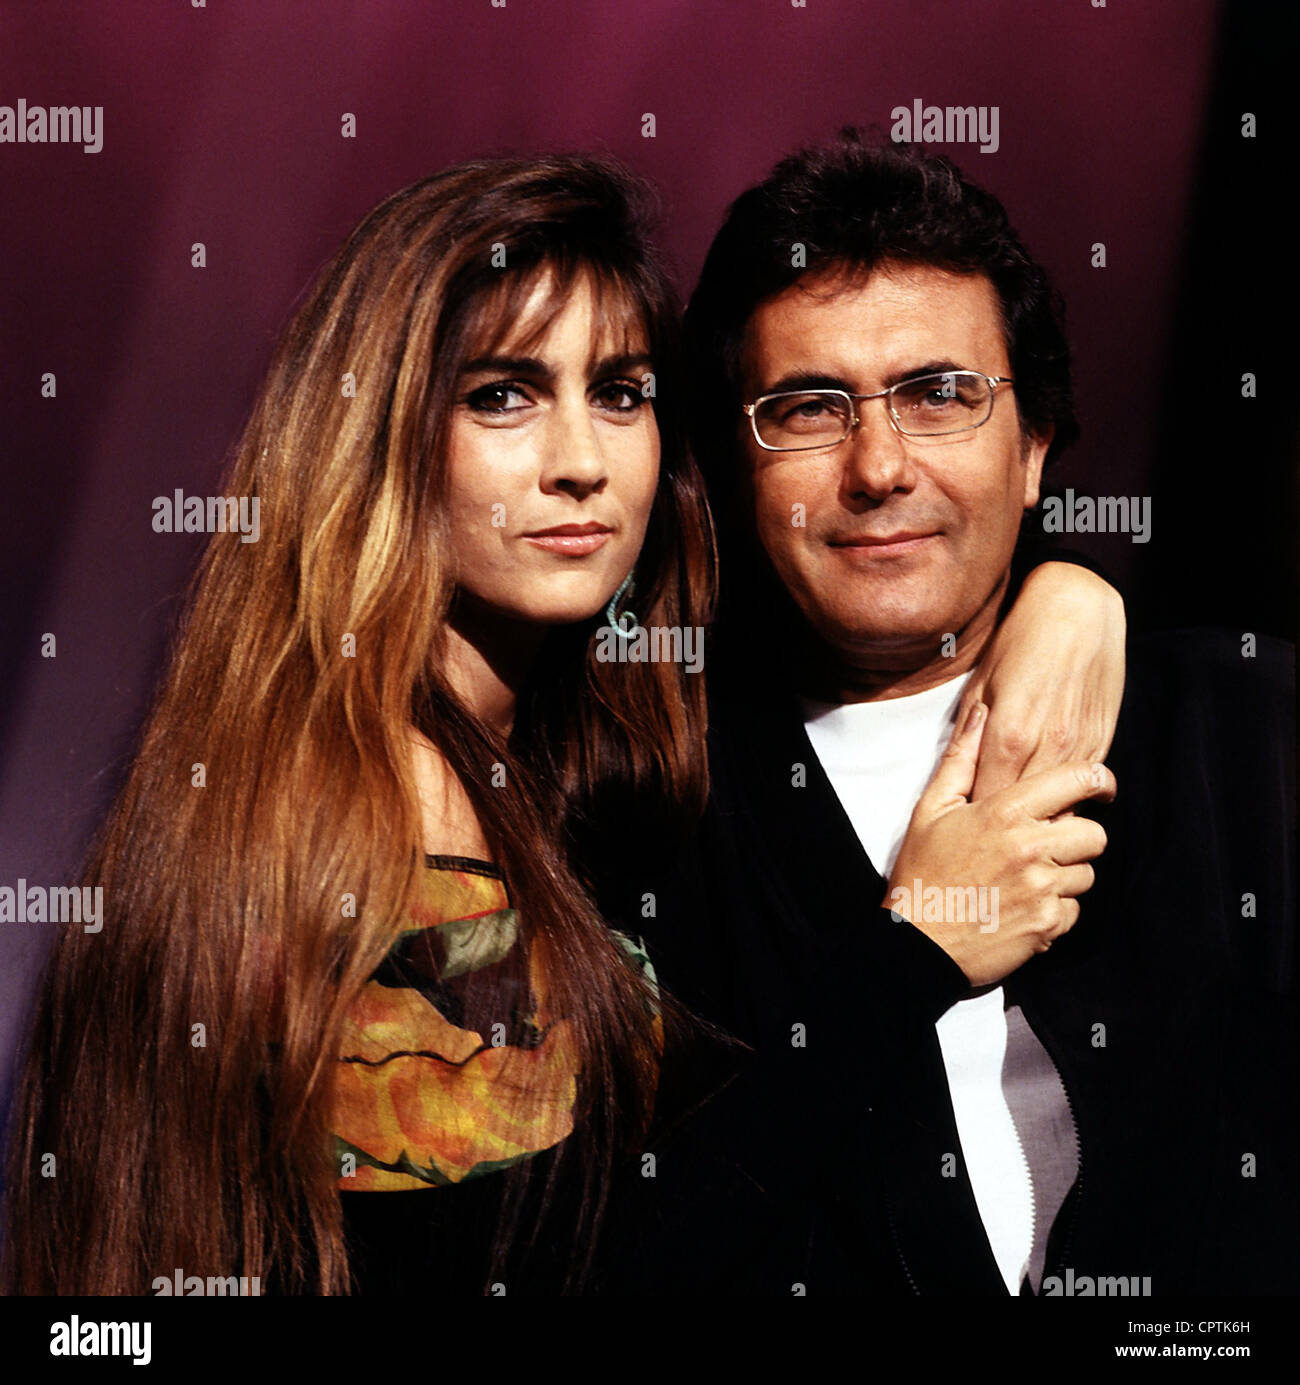 Romina Power High Resolution Stock Photography and Images - Alamy